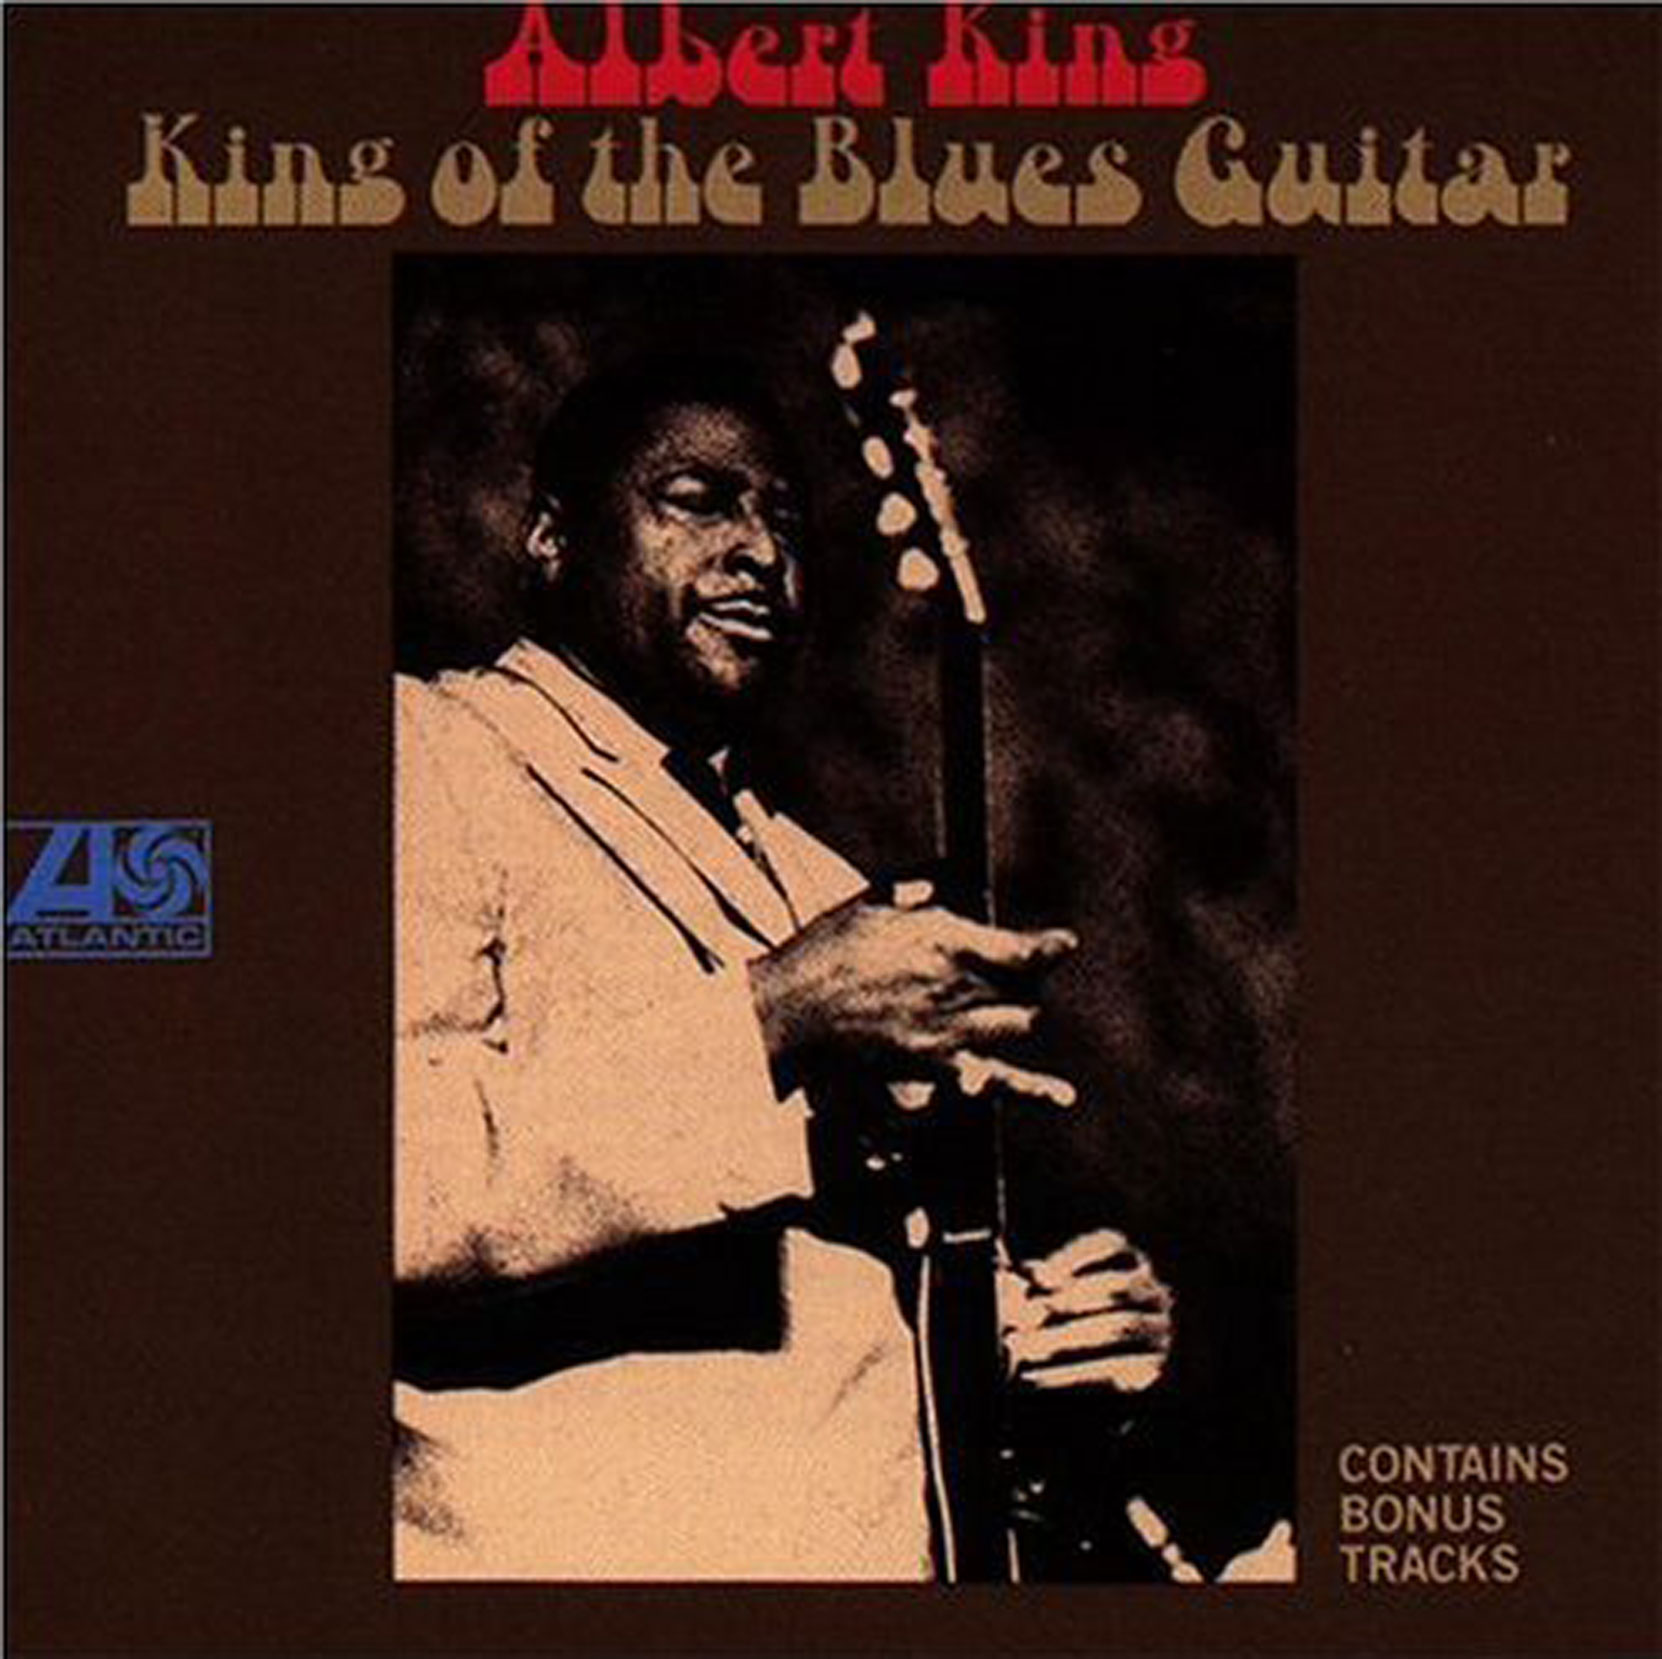 Albert King - King of the Blues Guitar, released on Stax Records. CD cover.